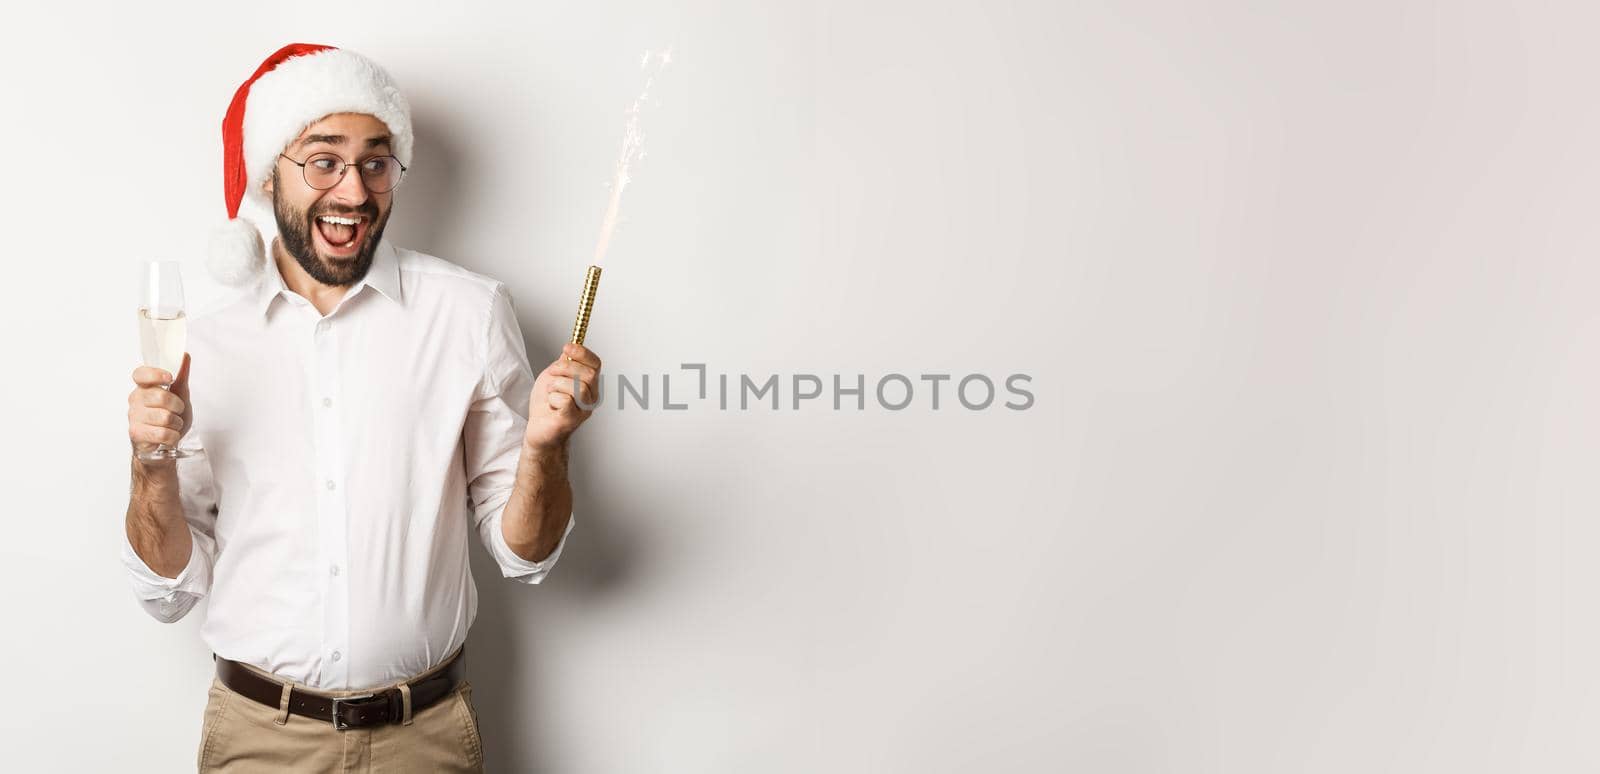 Winter holidays and celebration. Excited man celebrating New Year eve with fireworks sparkles and drinking champagne, wearing santa hat, white background.